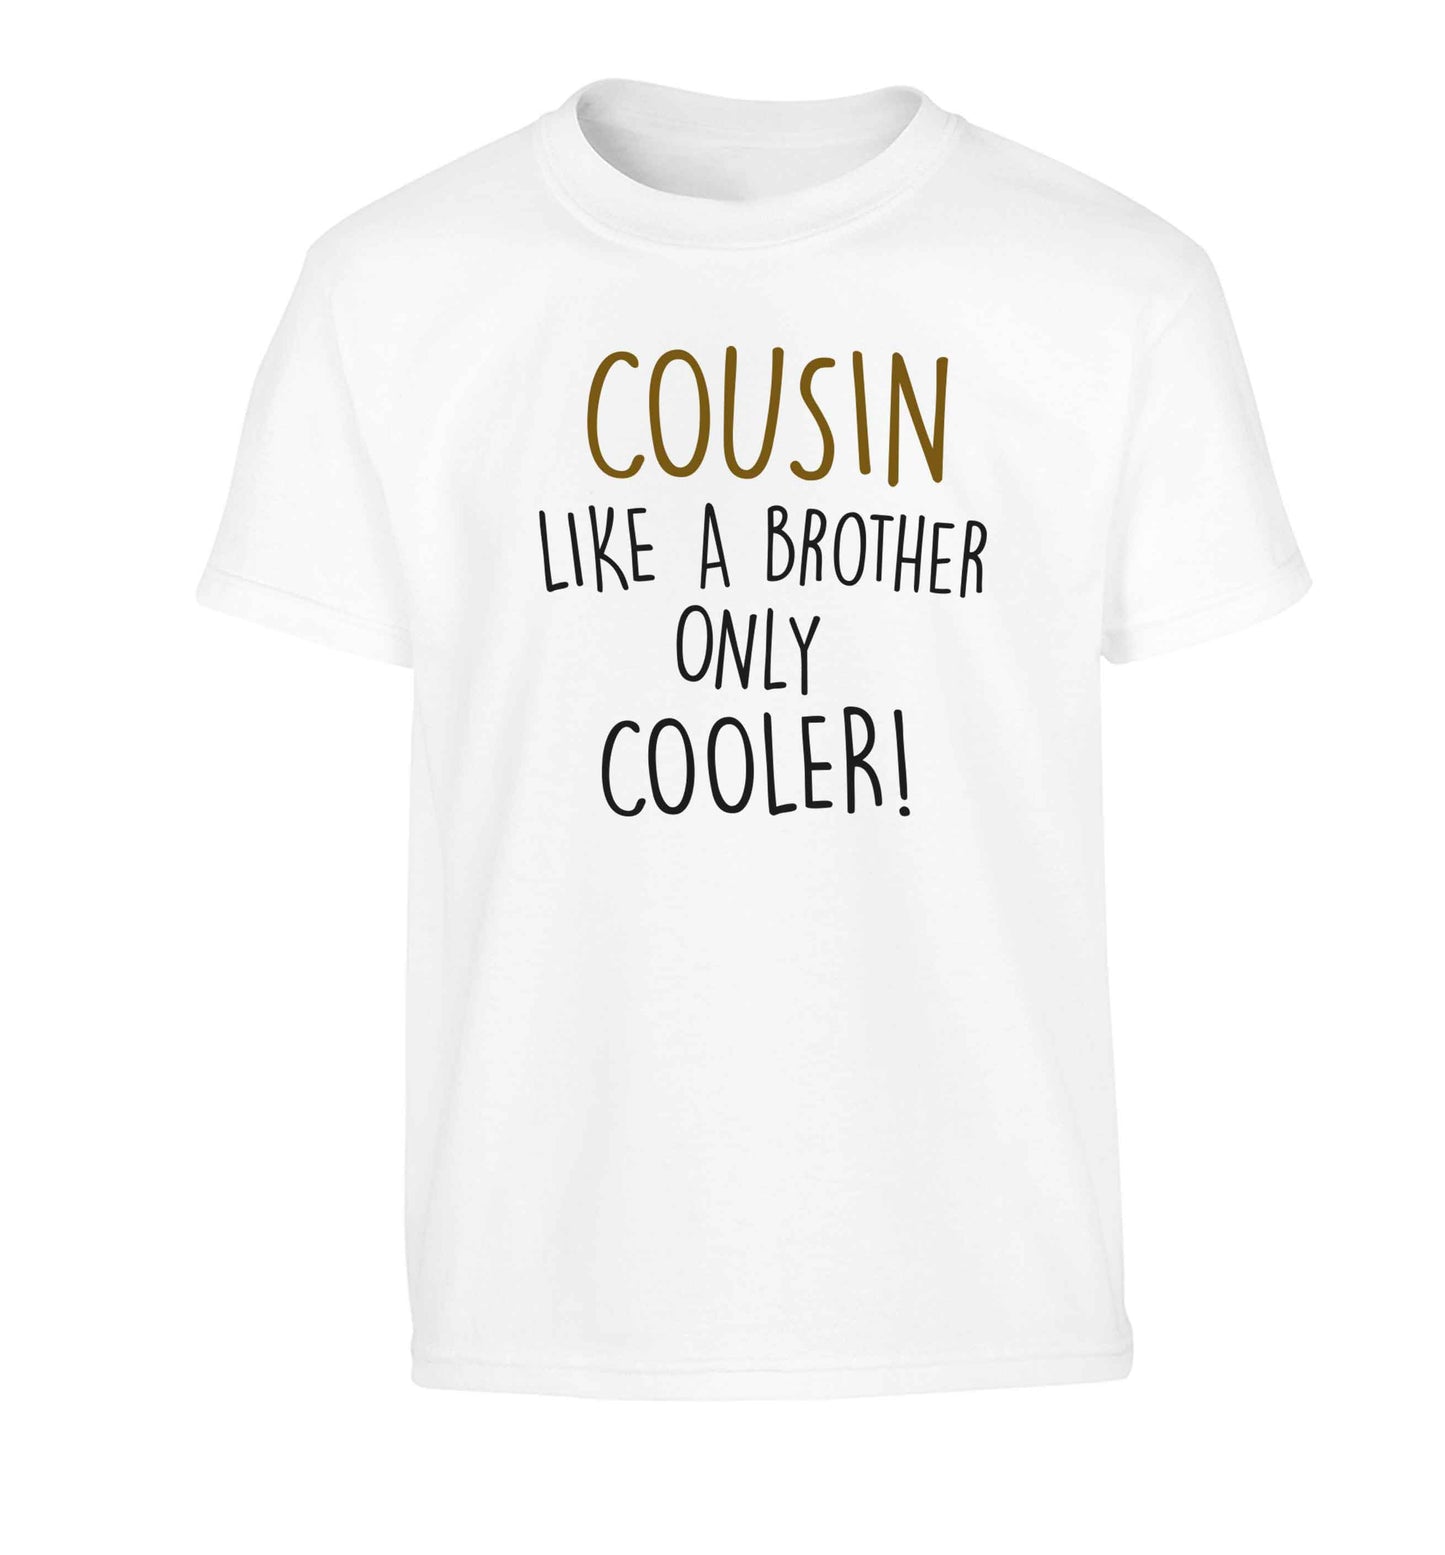 Cousin like a brother only cooler Children's white Tshirt 12-13 Years